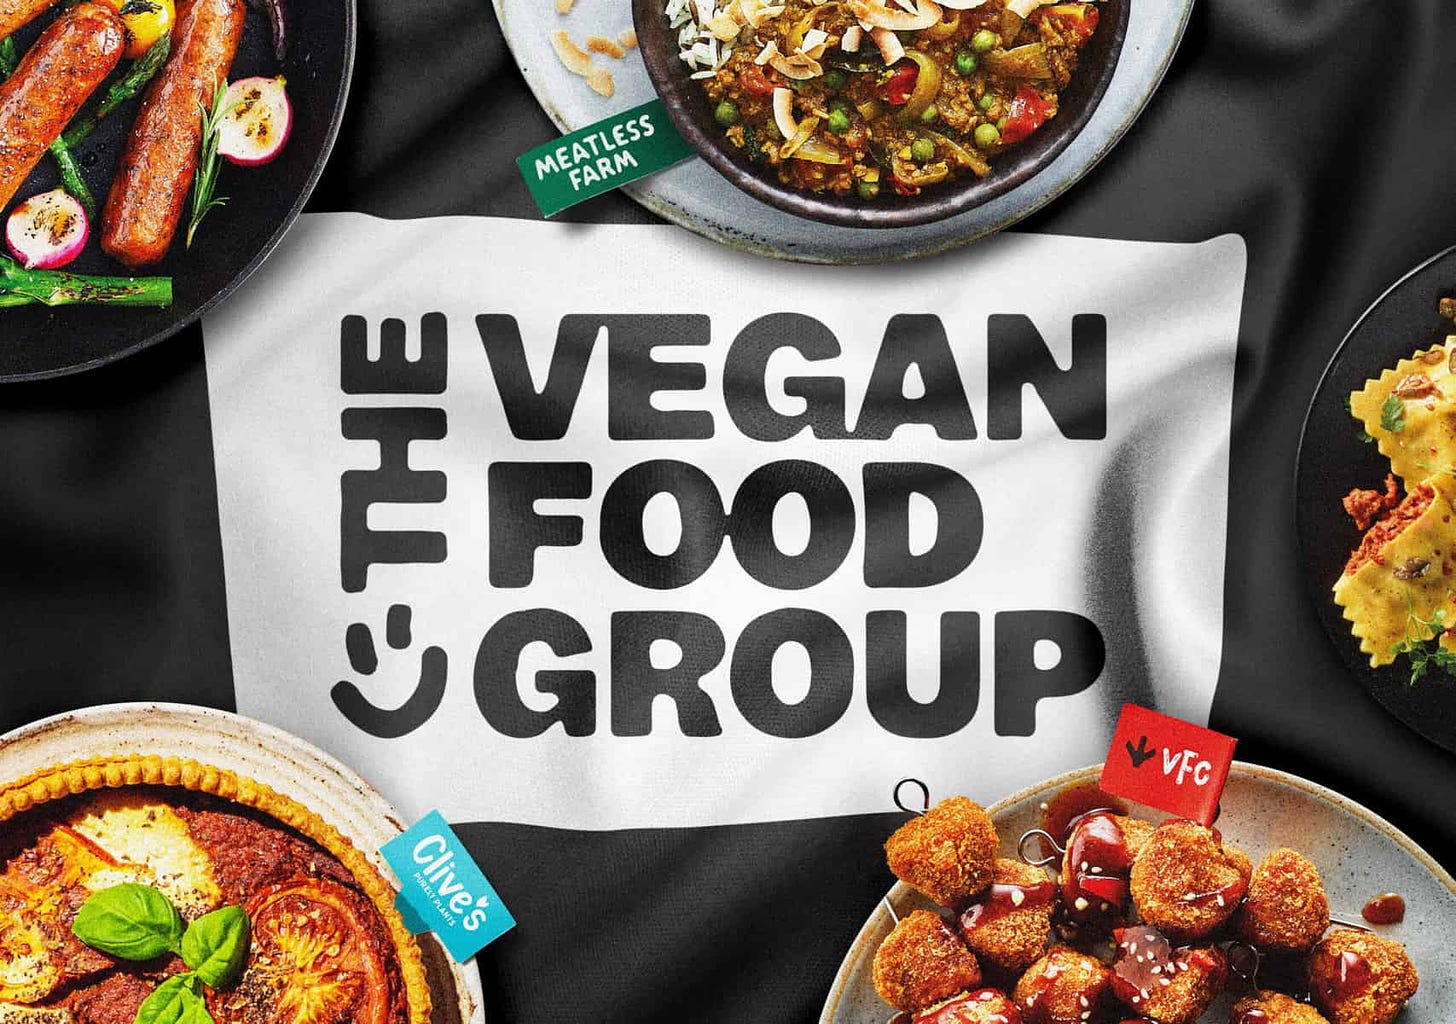 VFC Foods Becomes The Vegan Food Group, a Plant-Based Powerhouse "Heralding a Transformative Era"